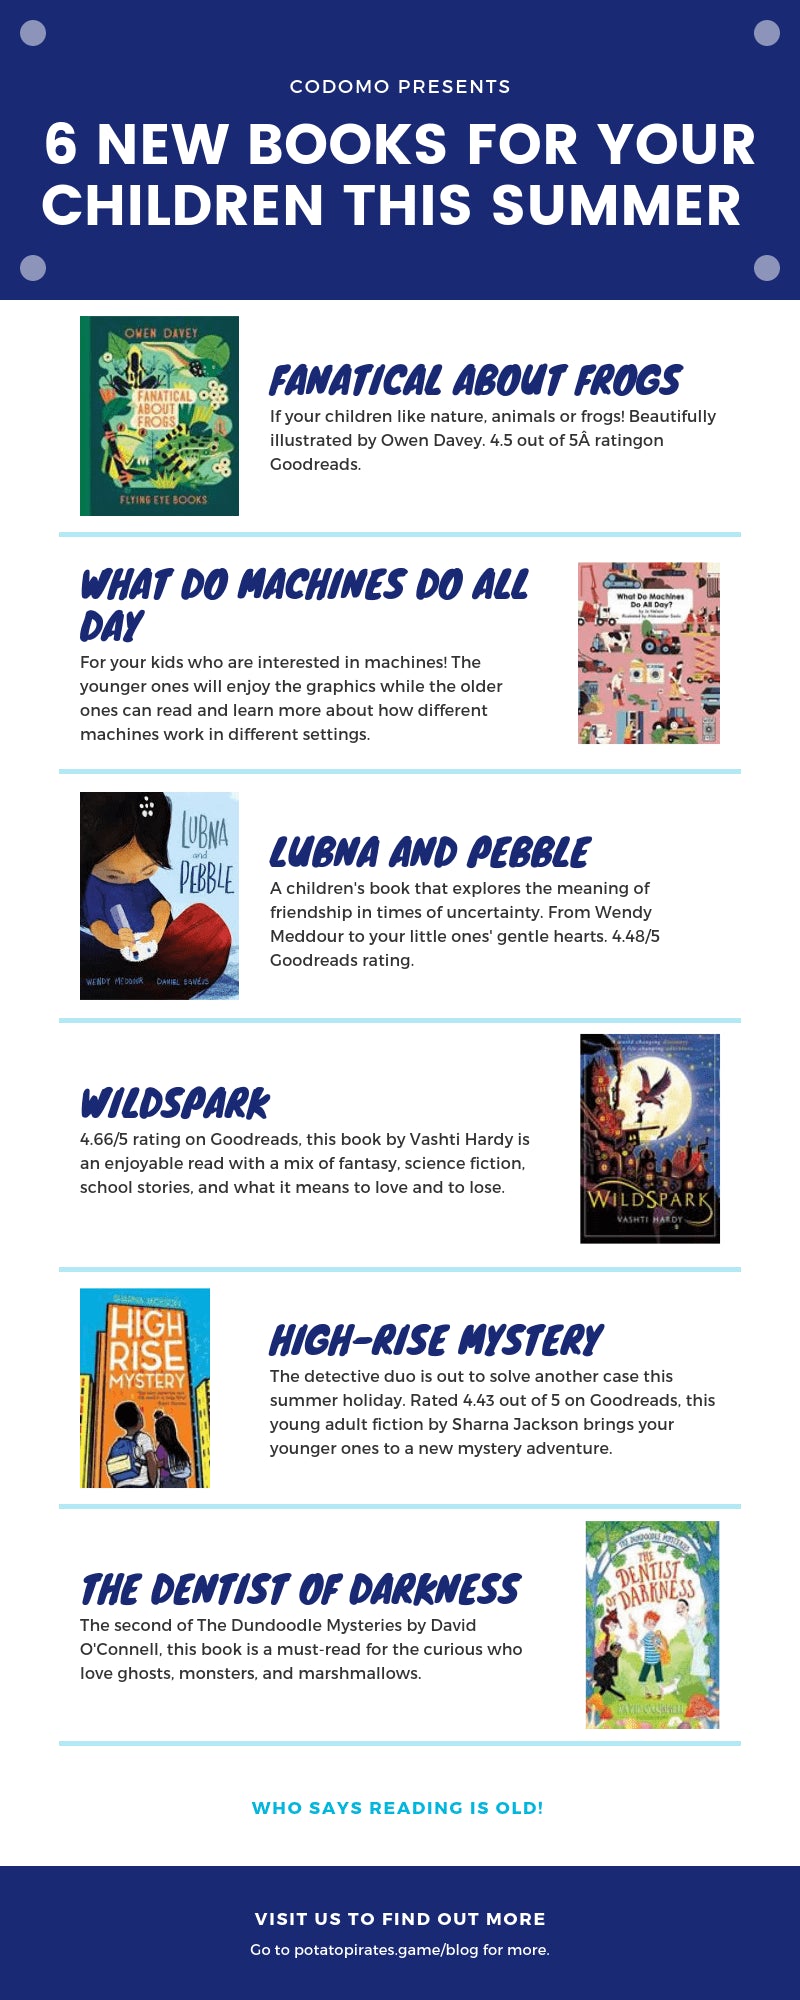 List of new books for children this summer infographic